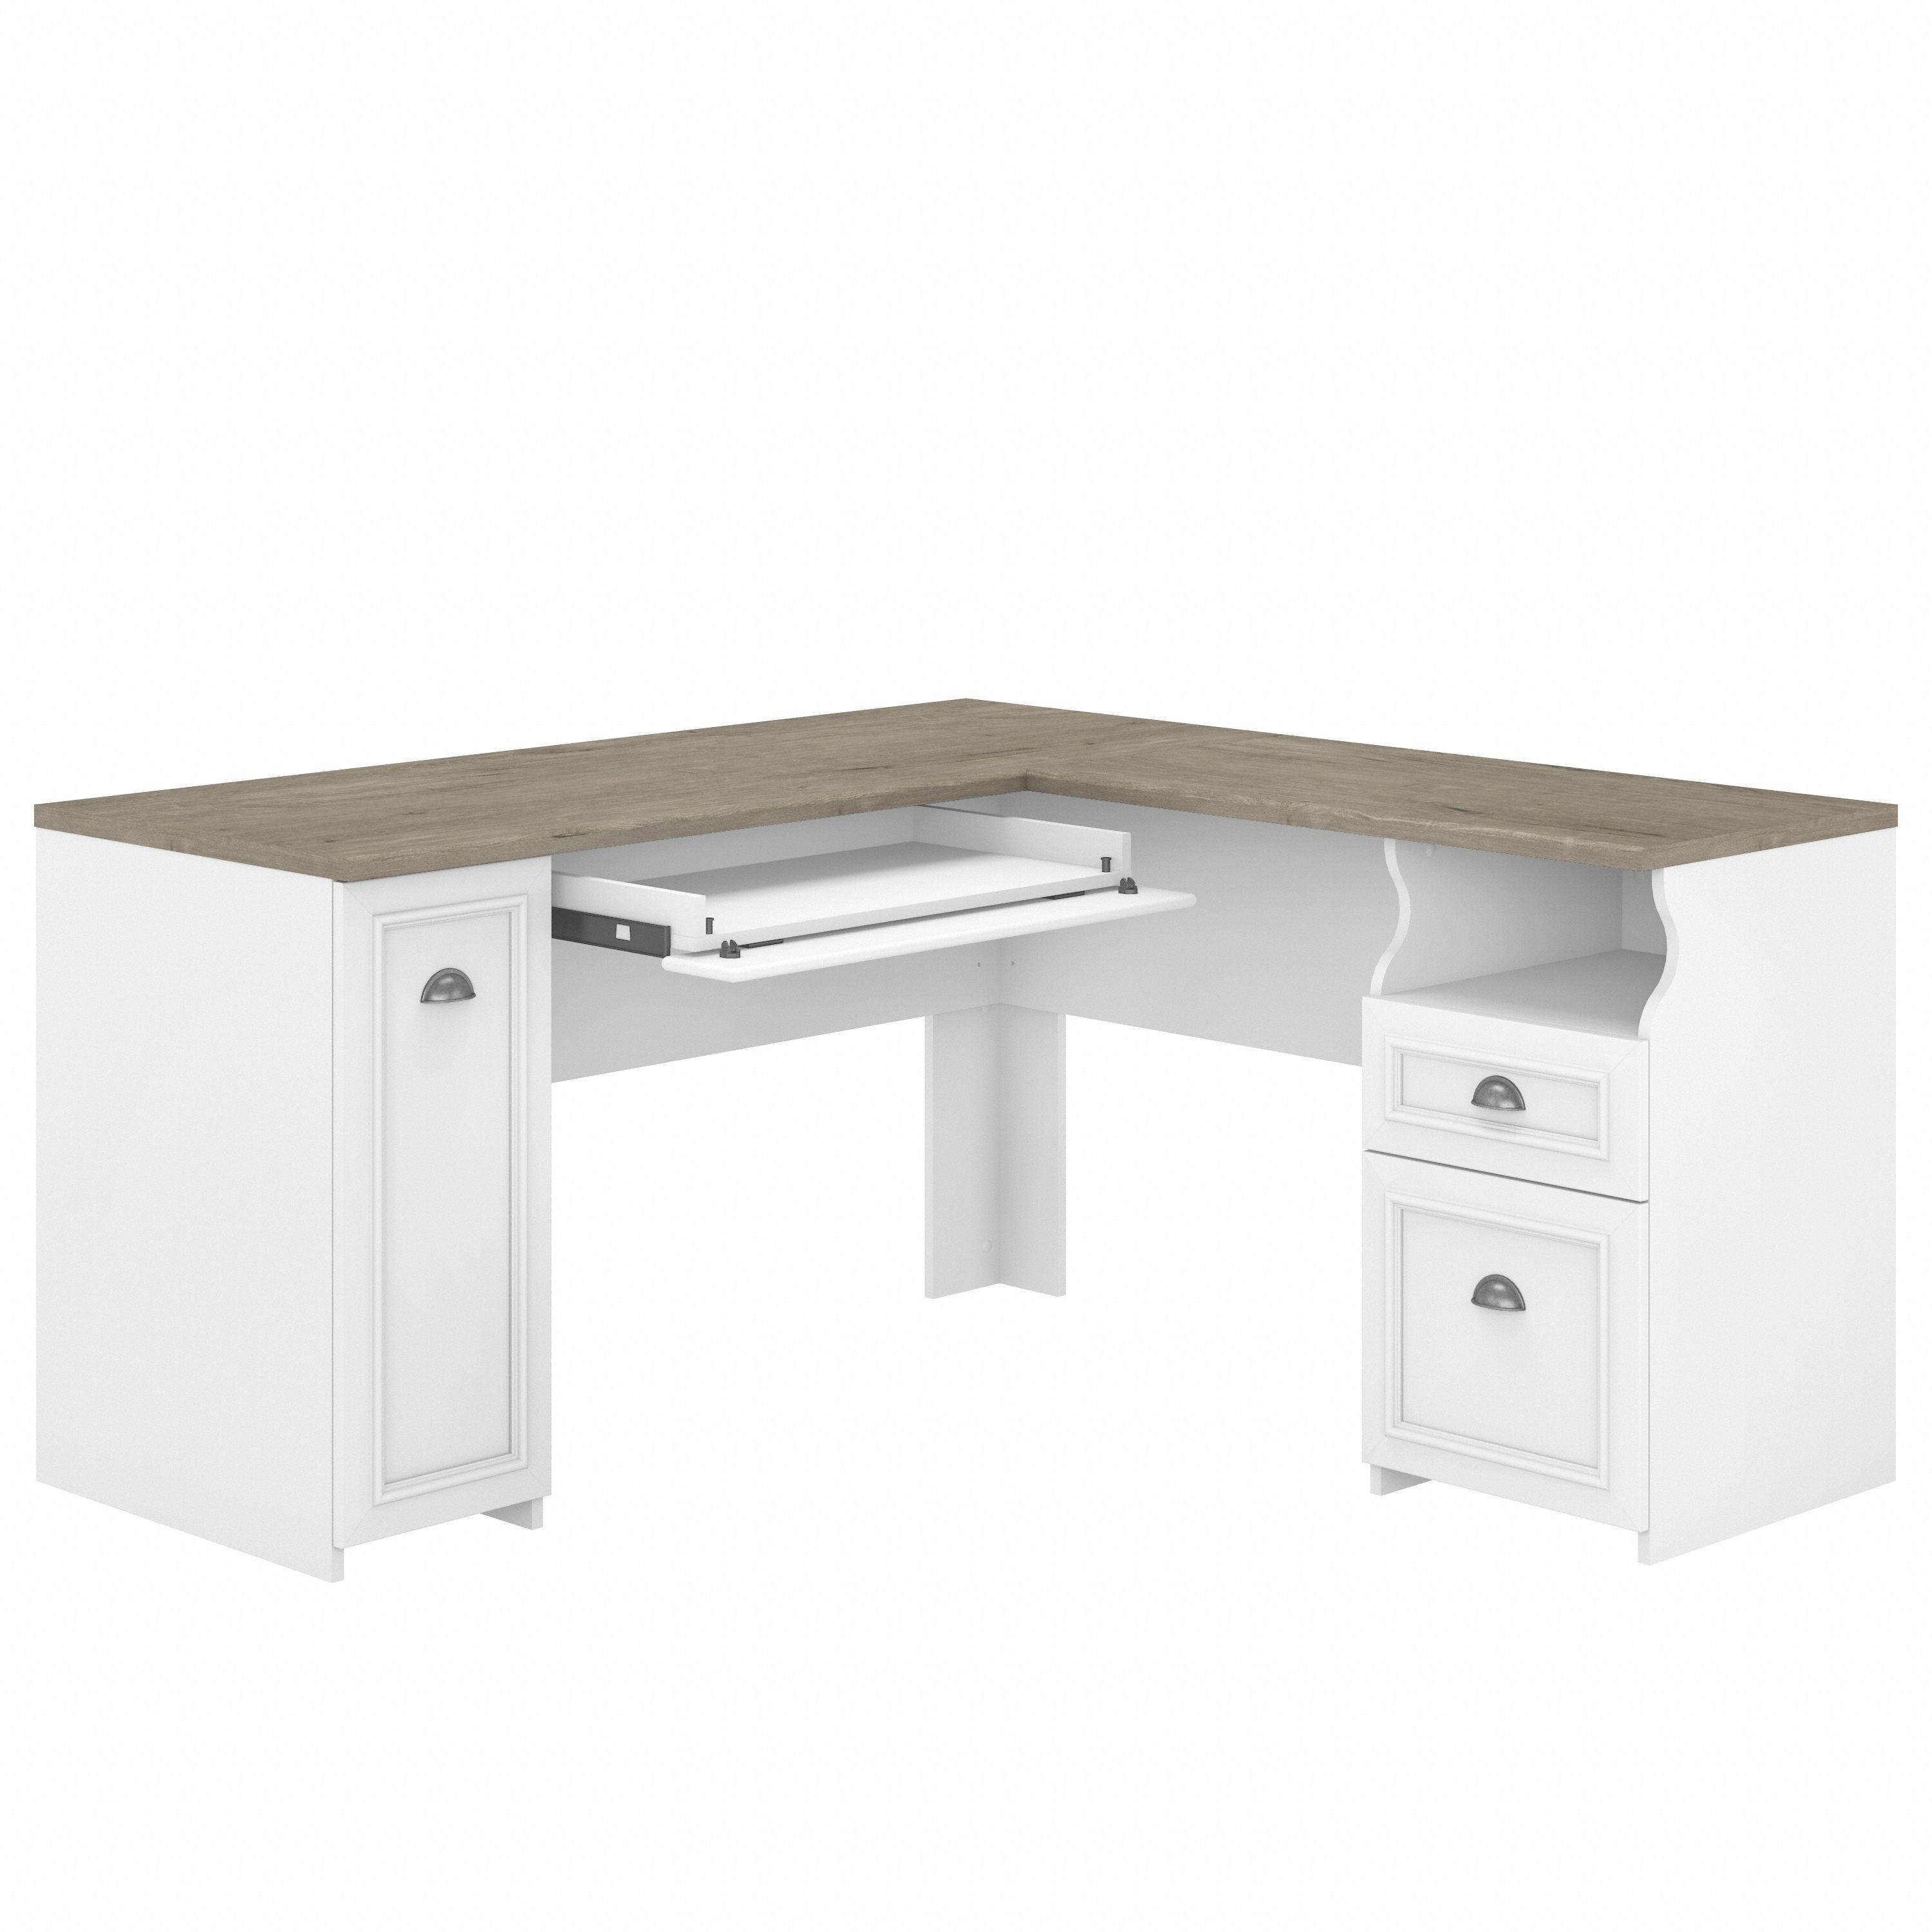 Shop Bush Furniture Fairview 60W L Shaped Desk with Drawers and Storage Cabinet 02 WC53630-03K #color_shiplap gray/pure white